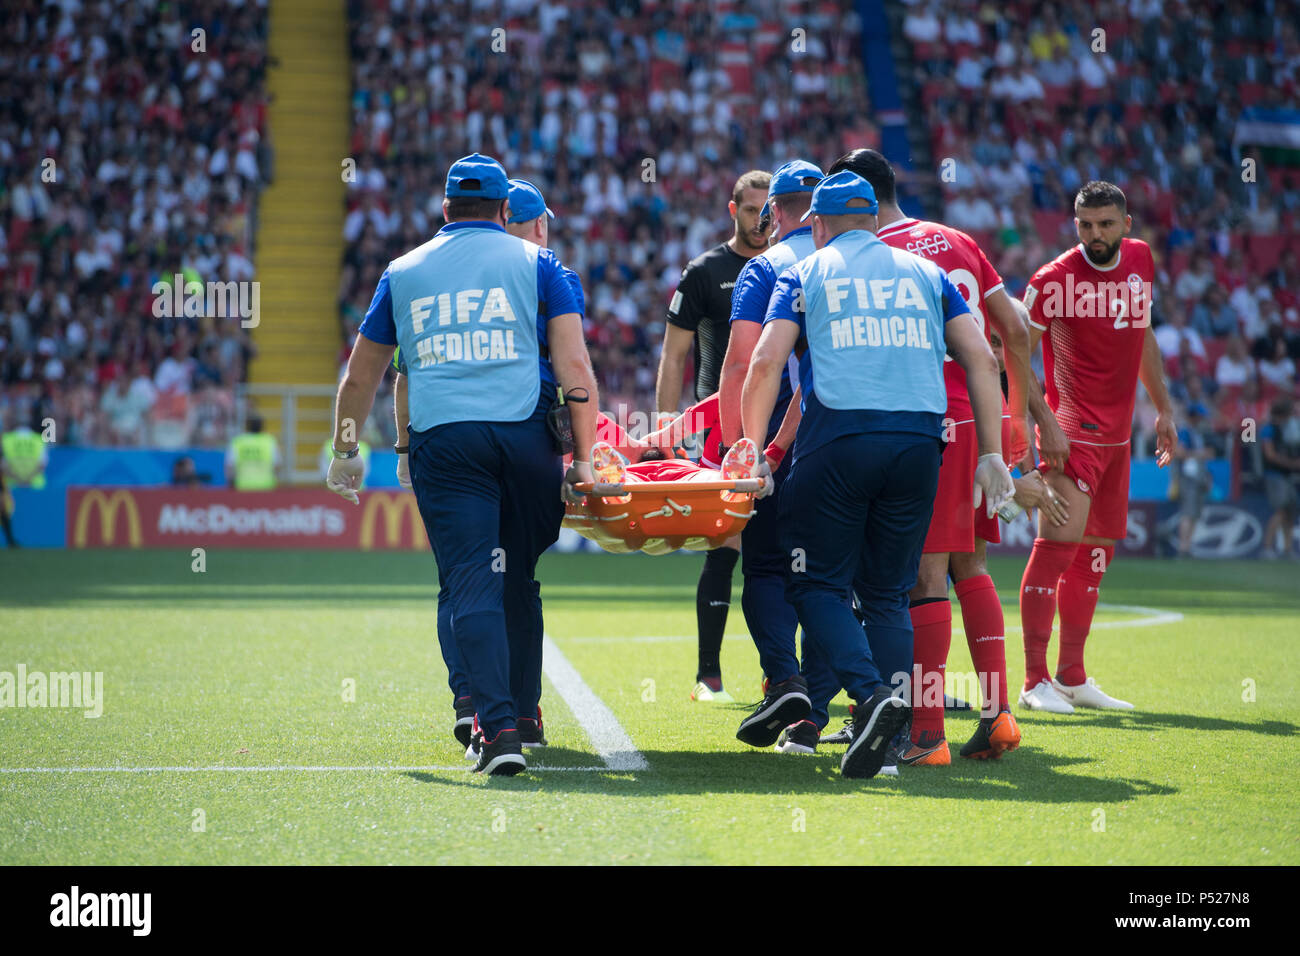 Moscow, Russia. 23rd June, 2018. Syam BEN YOUSSEF (TUN) is carried off the pitch, stretcher, paramedics, Sanitsster, injury, Belgium (BEL) - Tunisia (TUN) 5: 2, preliminary round, group G, game 29, on 23.06.2018 in Moscow; Football World Cup 2018 in Russia from 14.06. - 15.07.2018. | usage worldwide Credit: dpa/Alamy Live News Stock Photo